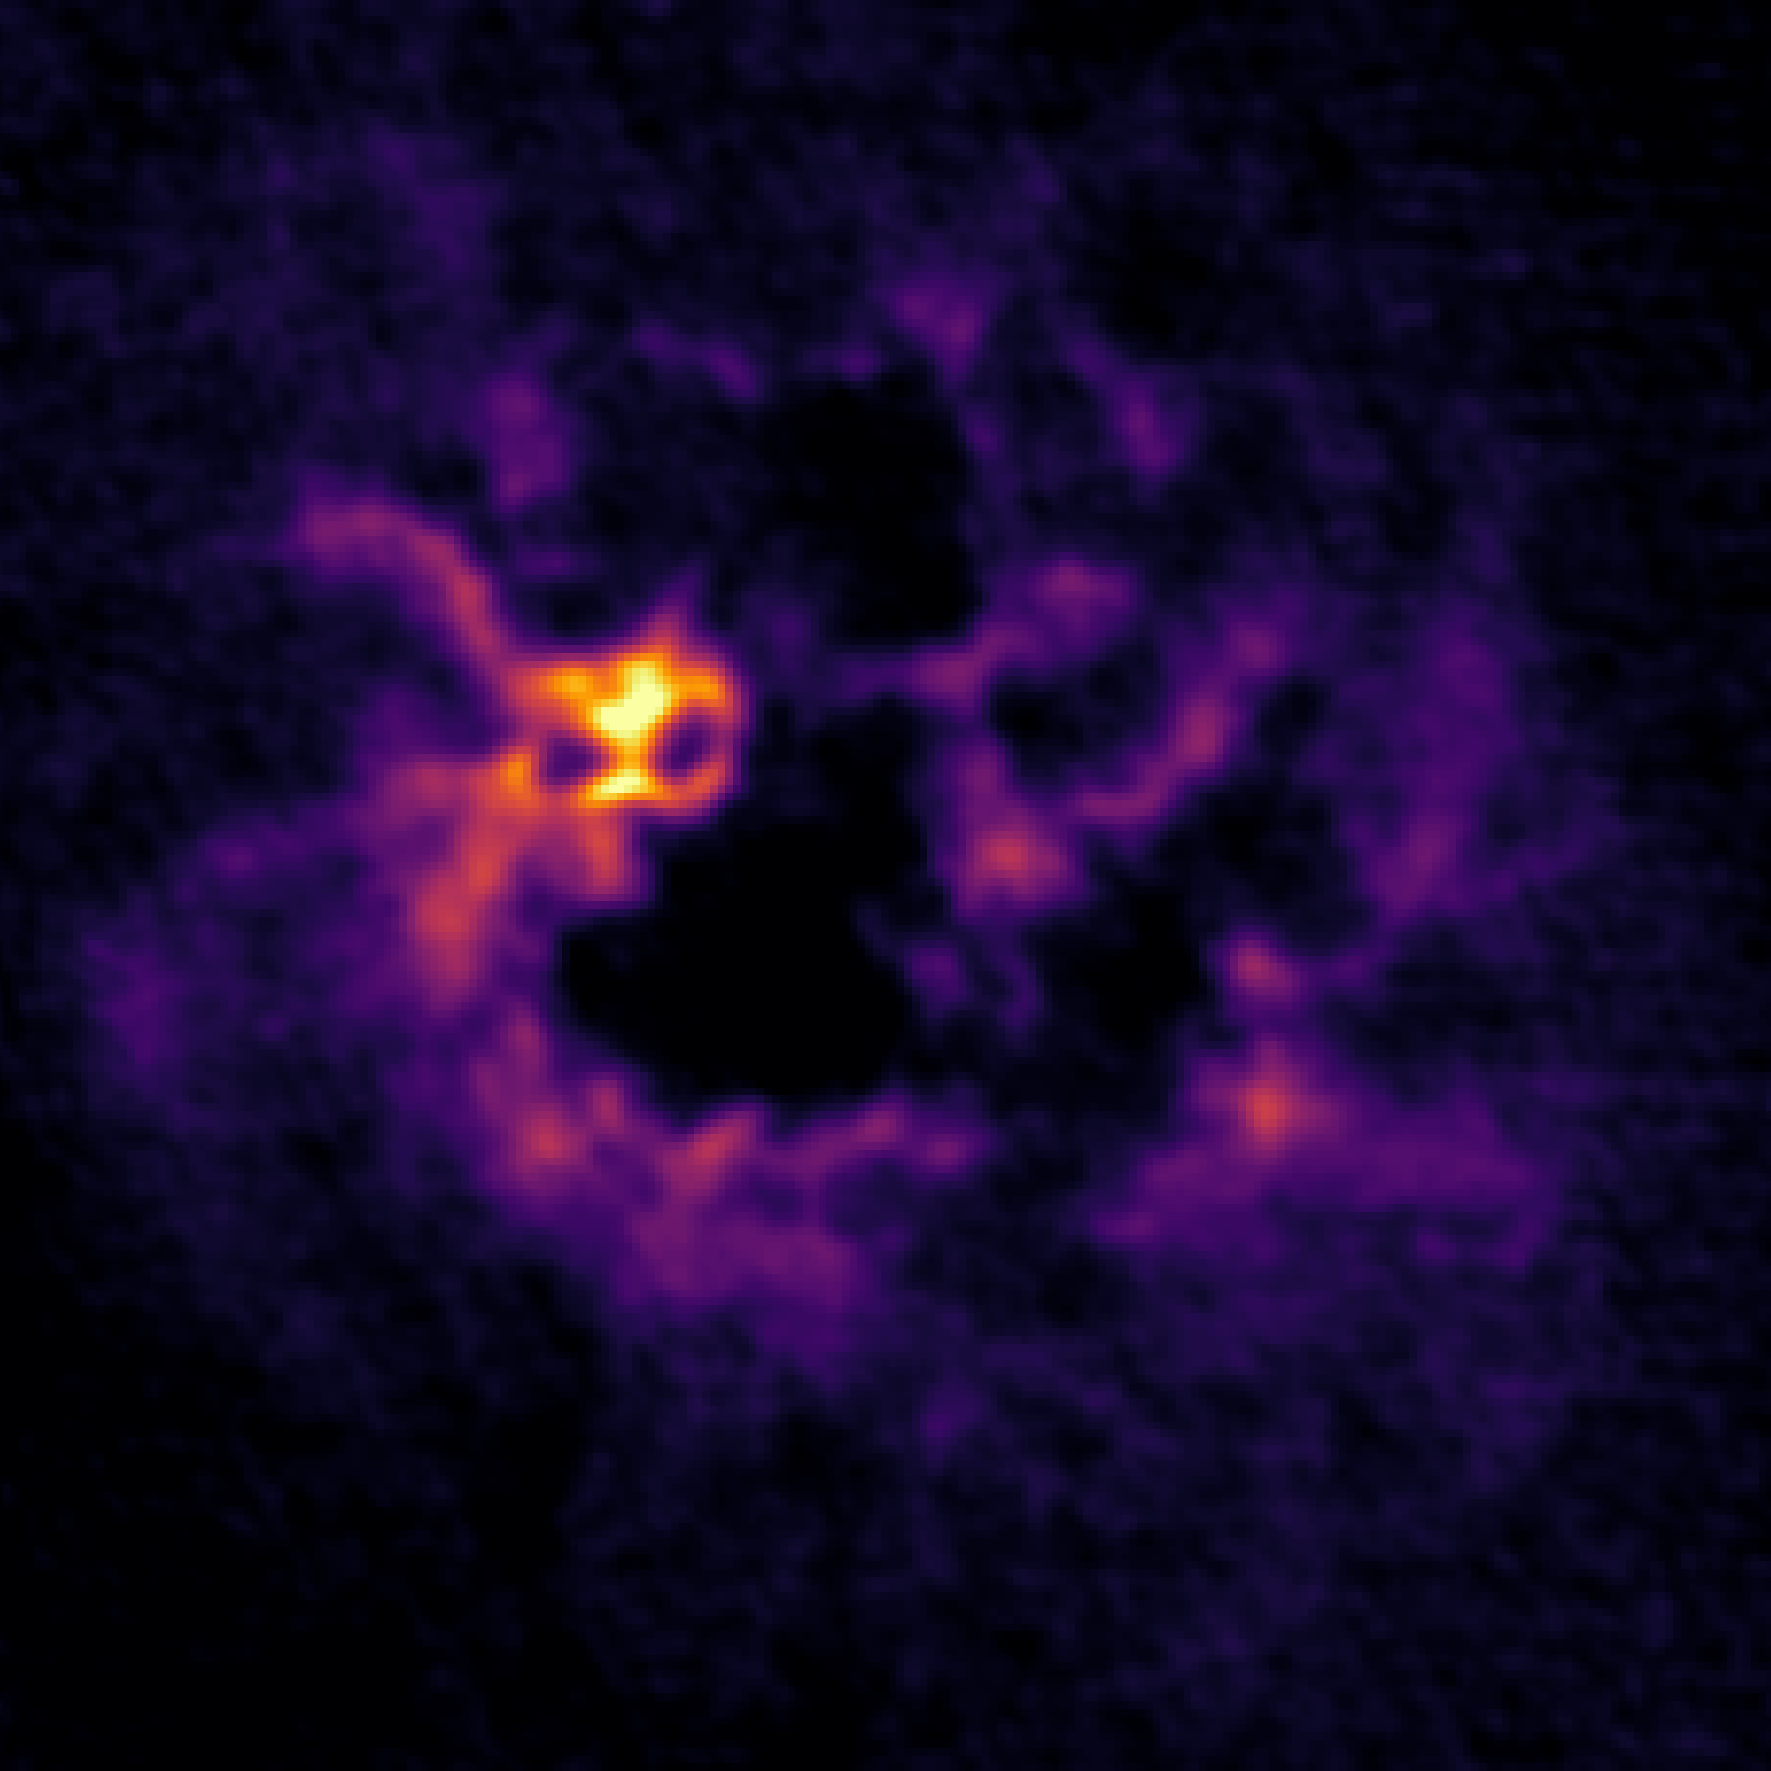 A Spooky View of Galactic Gas